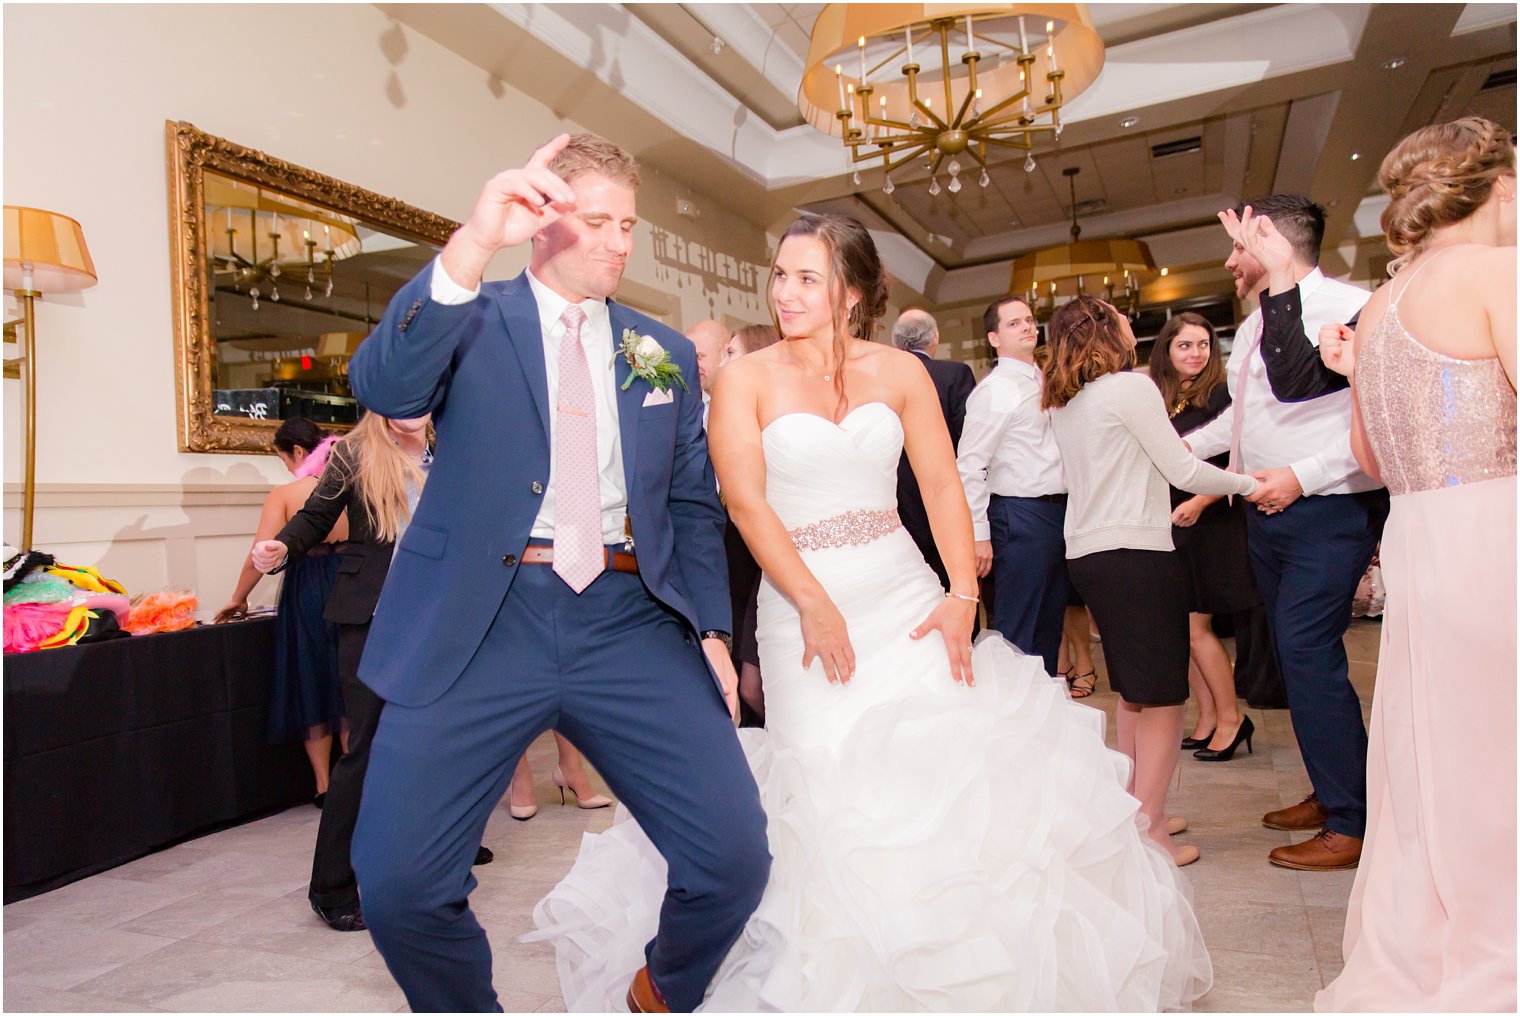 Bride and groom dancing at Stone House at Stirling Ridge in Warren, NJ | Encore Entertainment